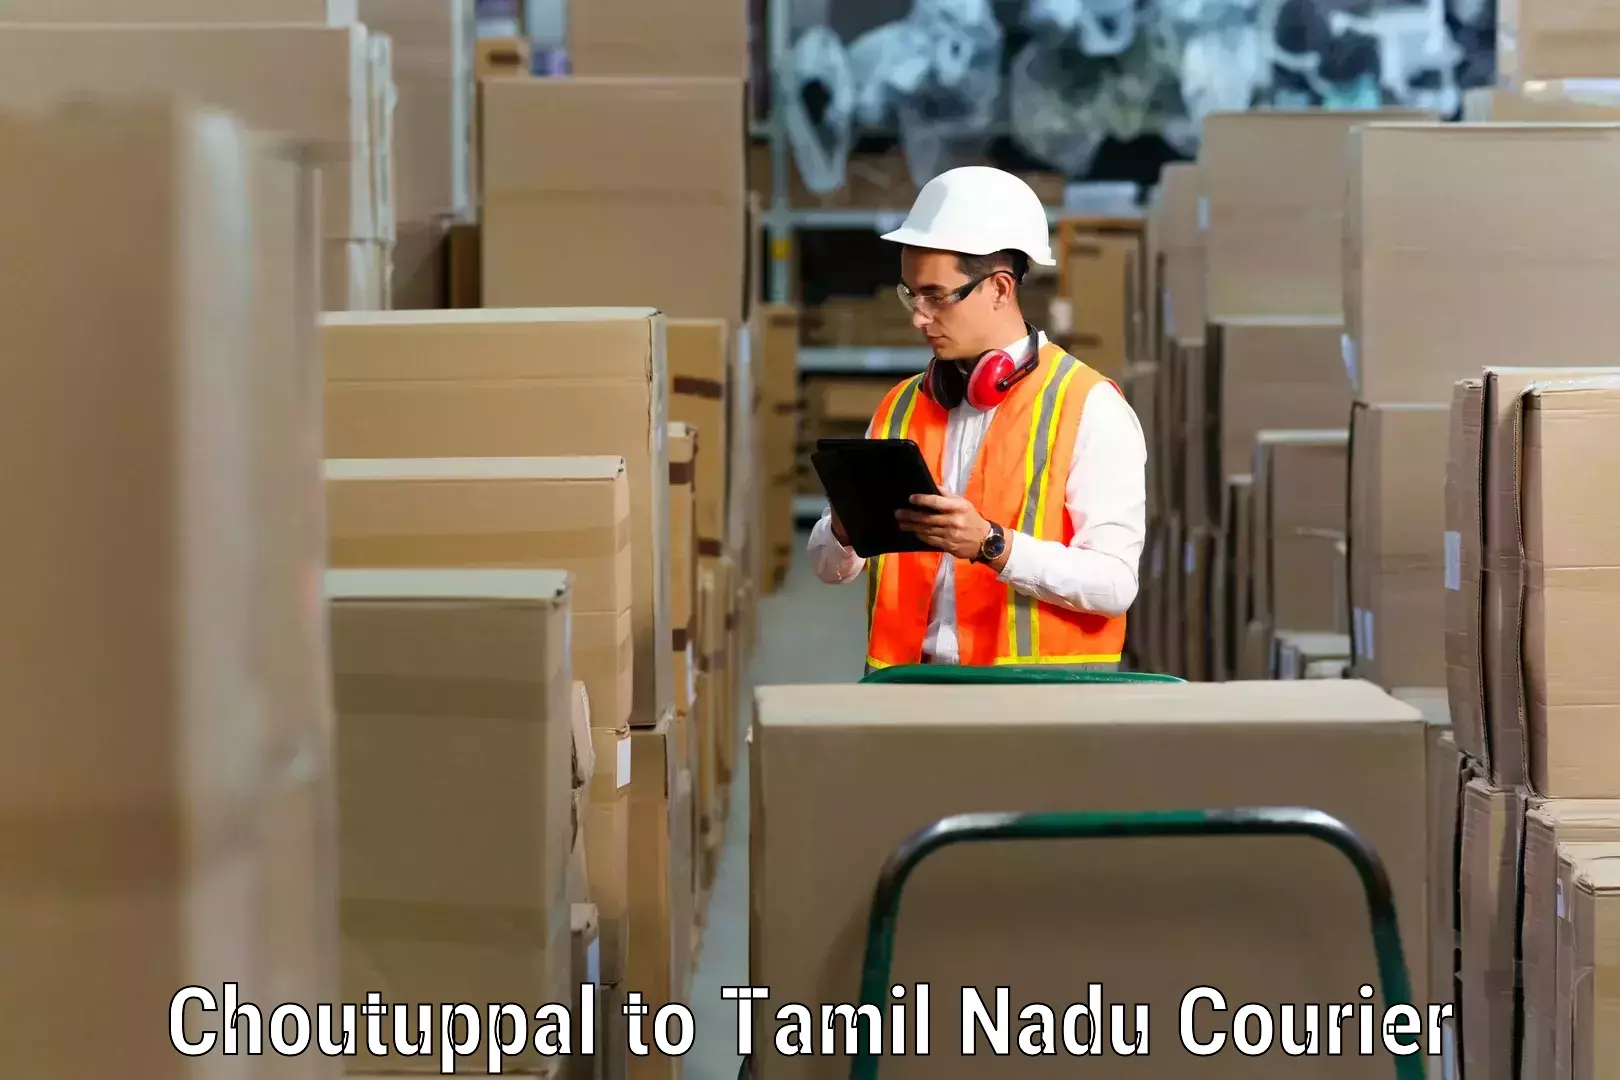 Trusted relocation experts Choutuppal to Memalur